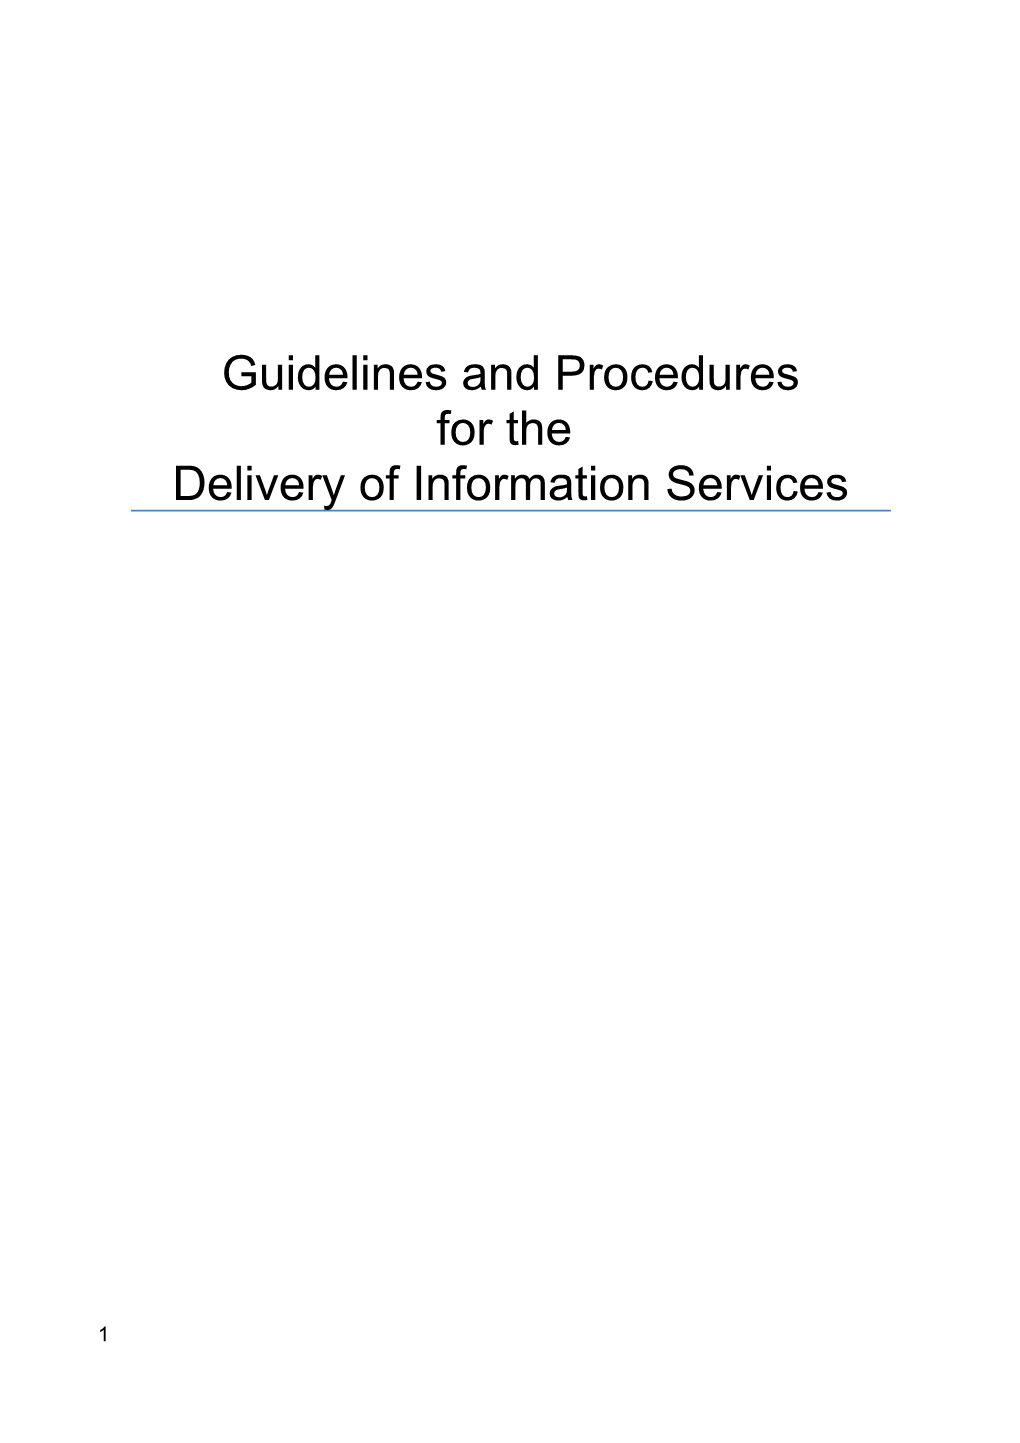 Policies & Procedures Manual for the Provision of Reference Service